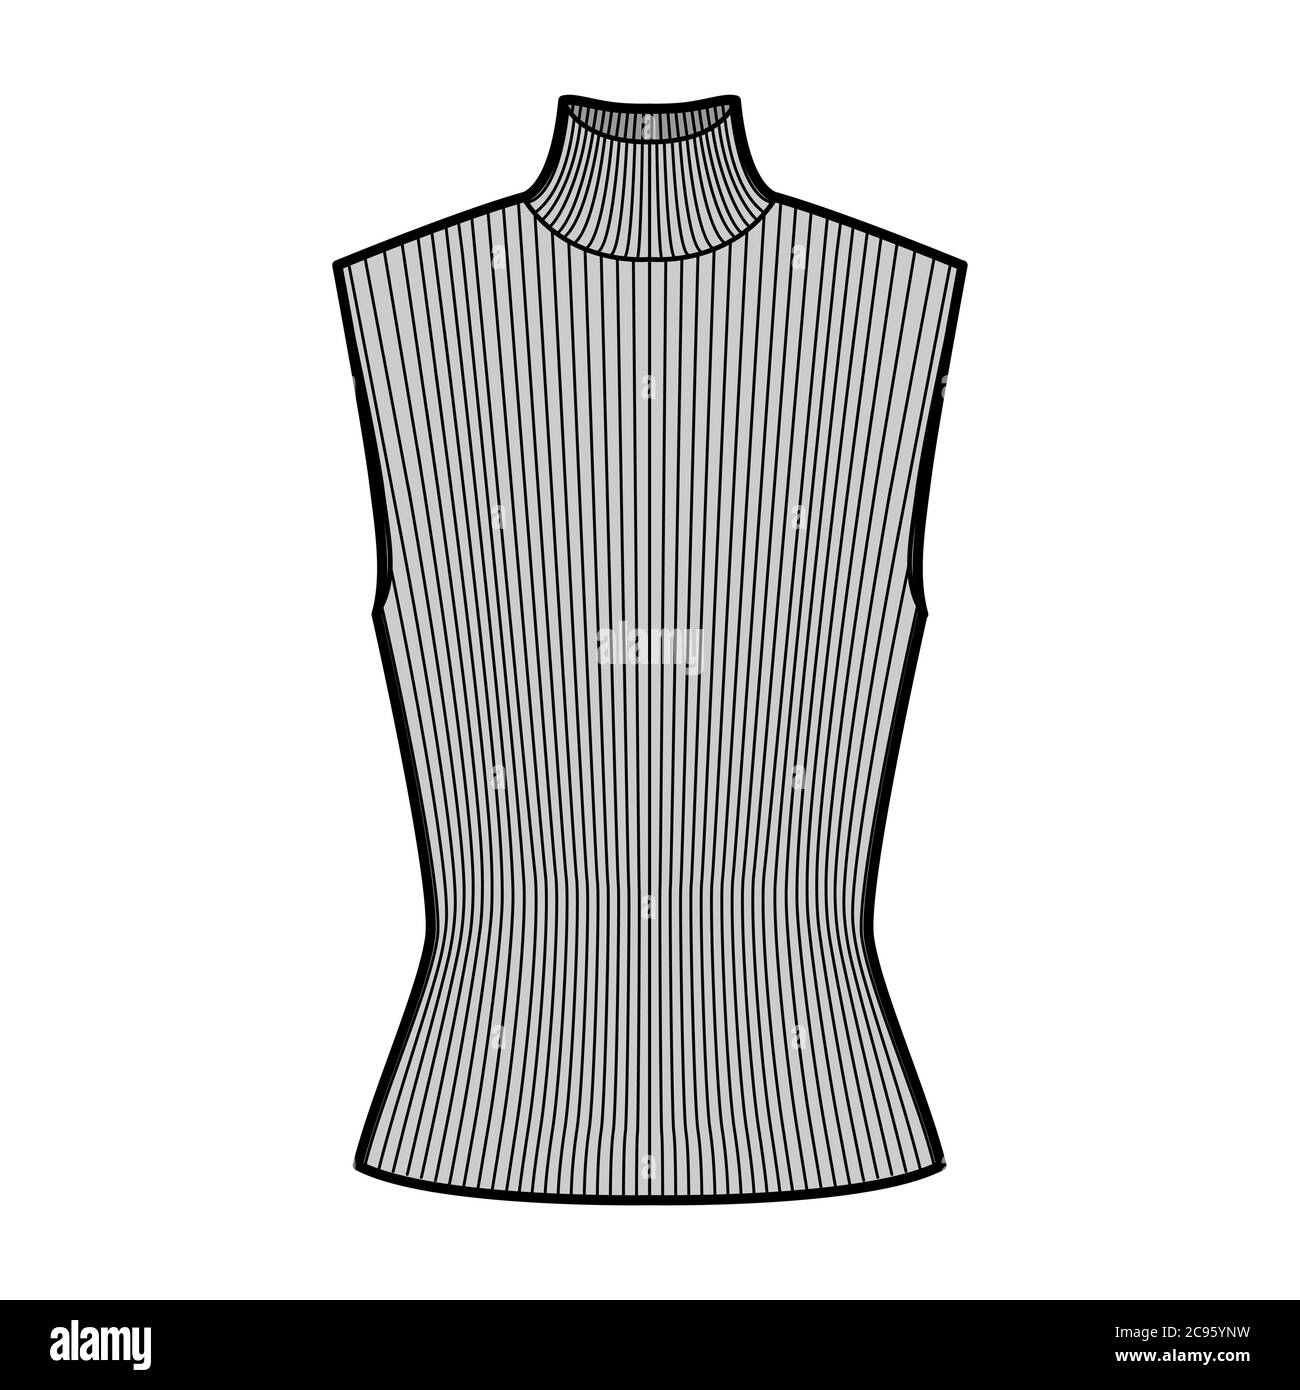 Turtleneck rib sweater technical fashion illustration with fitted body, sleeveless jumper. Flat shirt apparel template front, grey color. Women, men unisex top CAD mockup Stock Vector